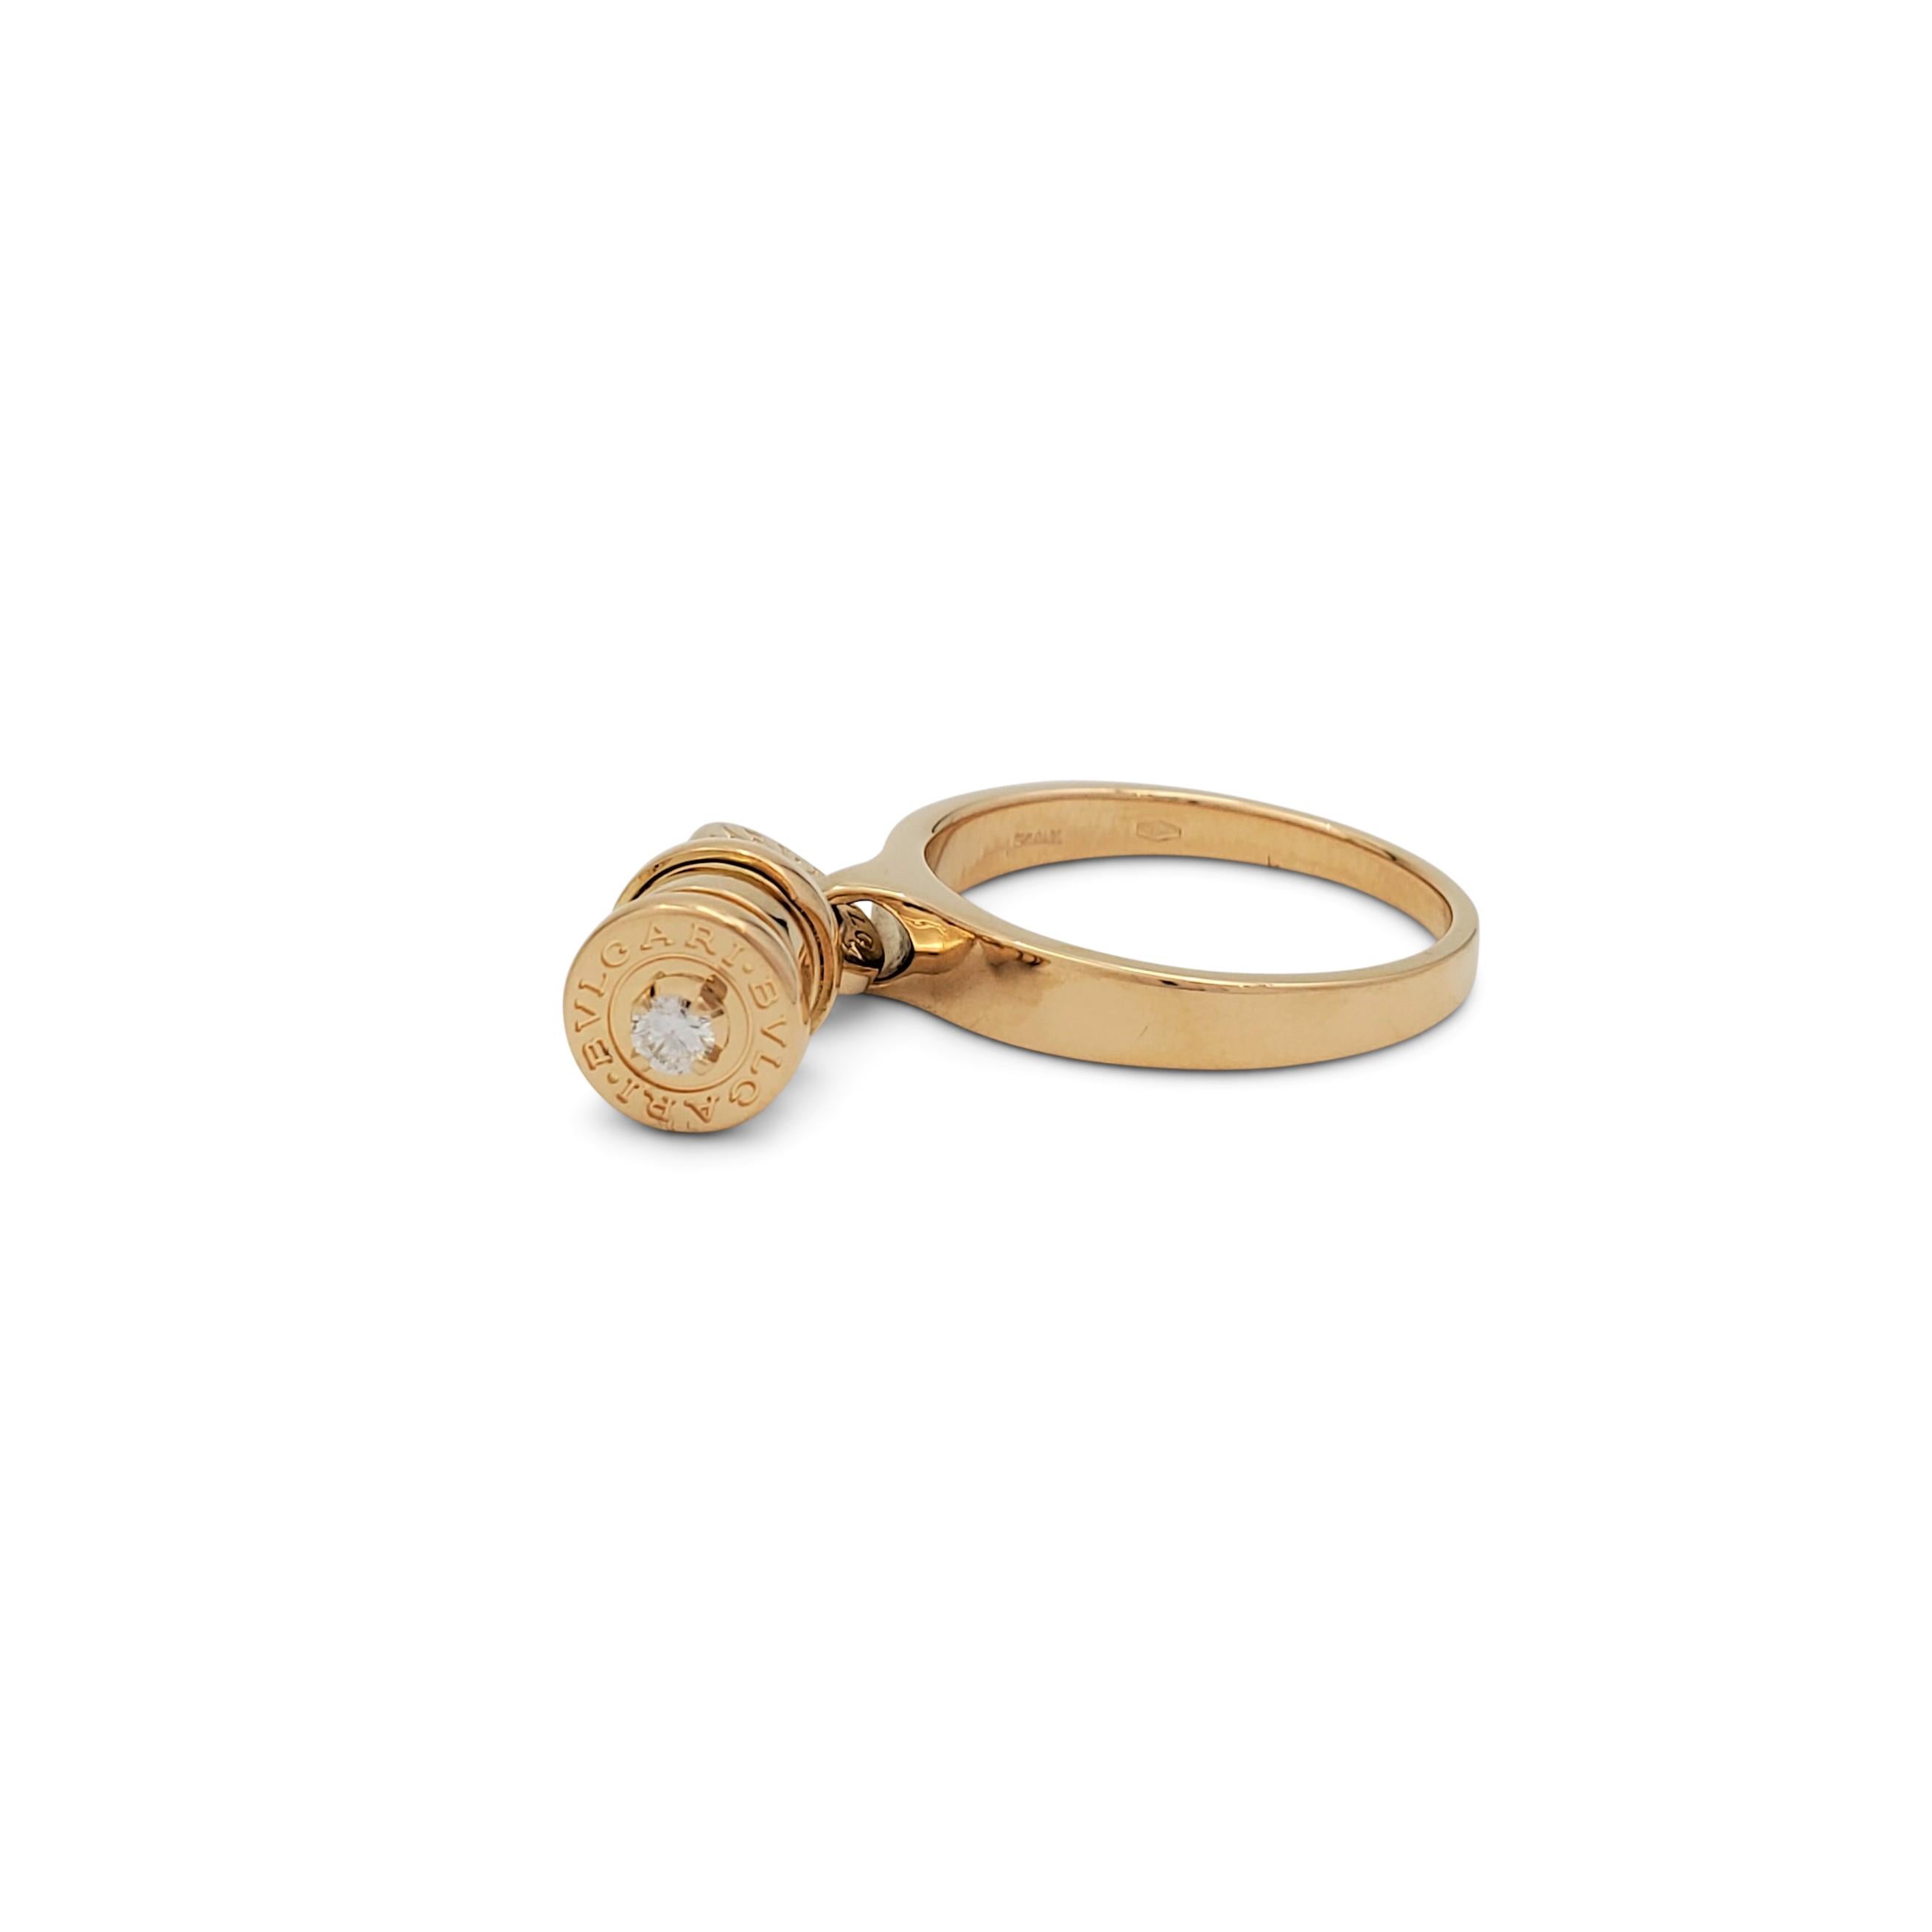 Authentic Bvlgari B.zero1 ring crafted in 18 karat yellow gold features a charm in the house's signature tubogas style set with a single diamond. Signed Bvlgari, 750, Italy, with serial number. The ring is not presented with the original box or